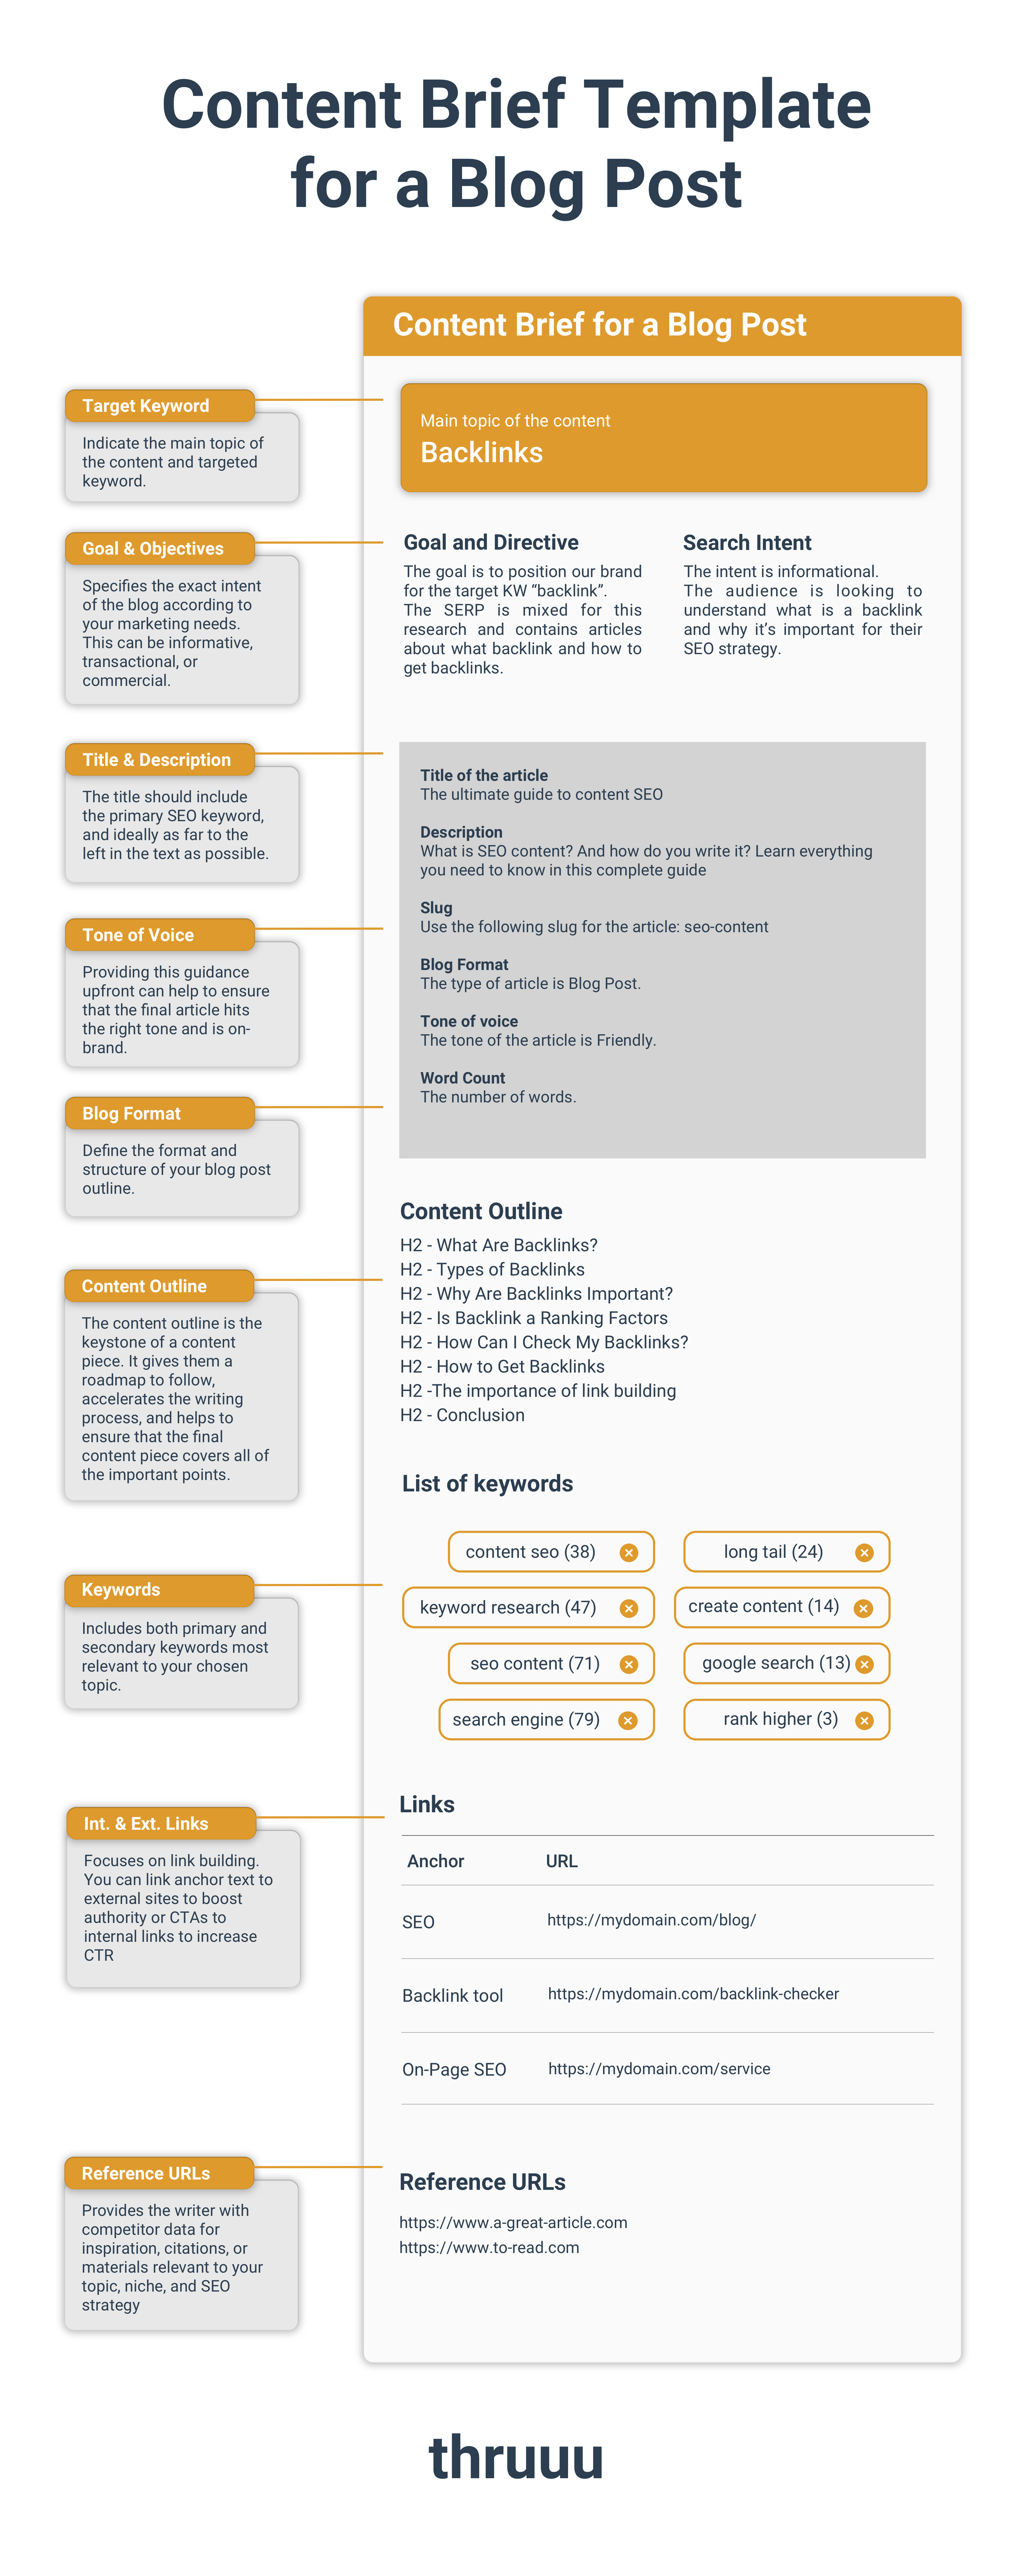 Content Brief Template for a Blog Post